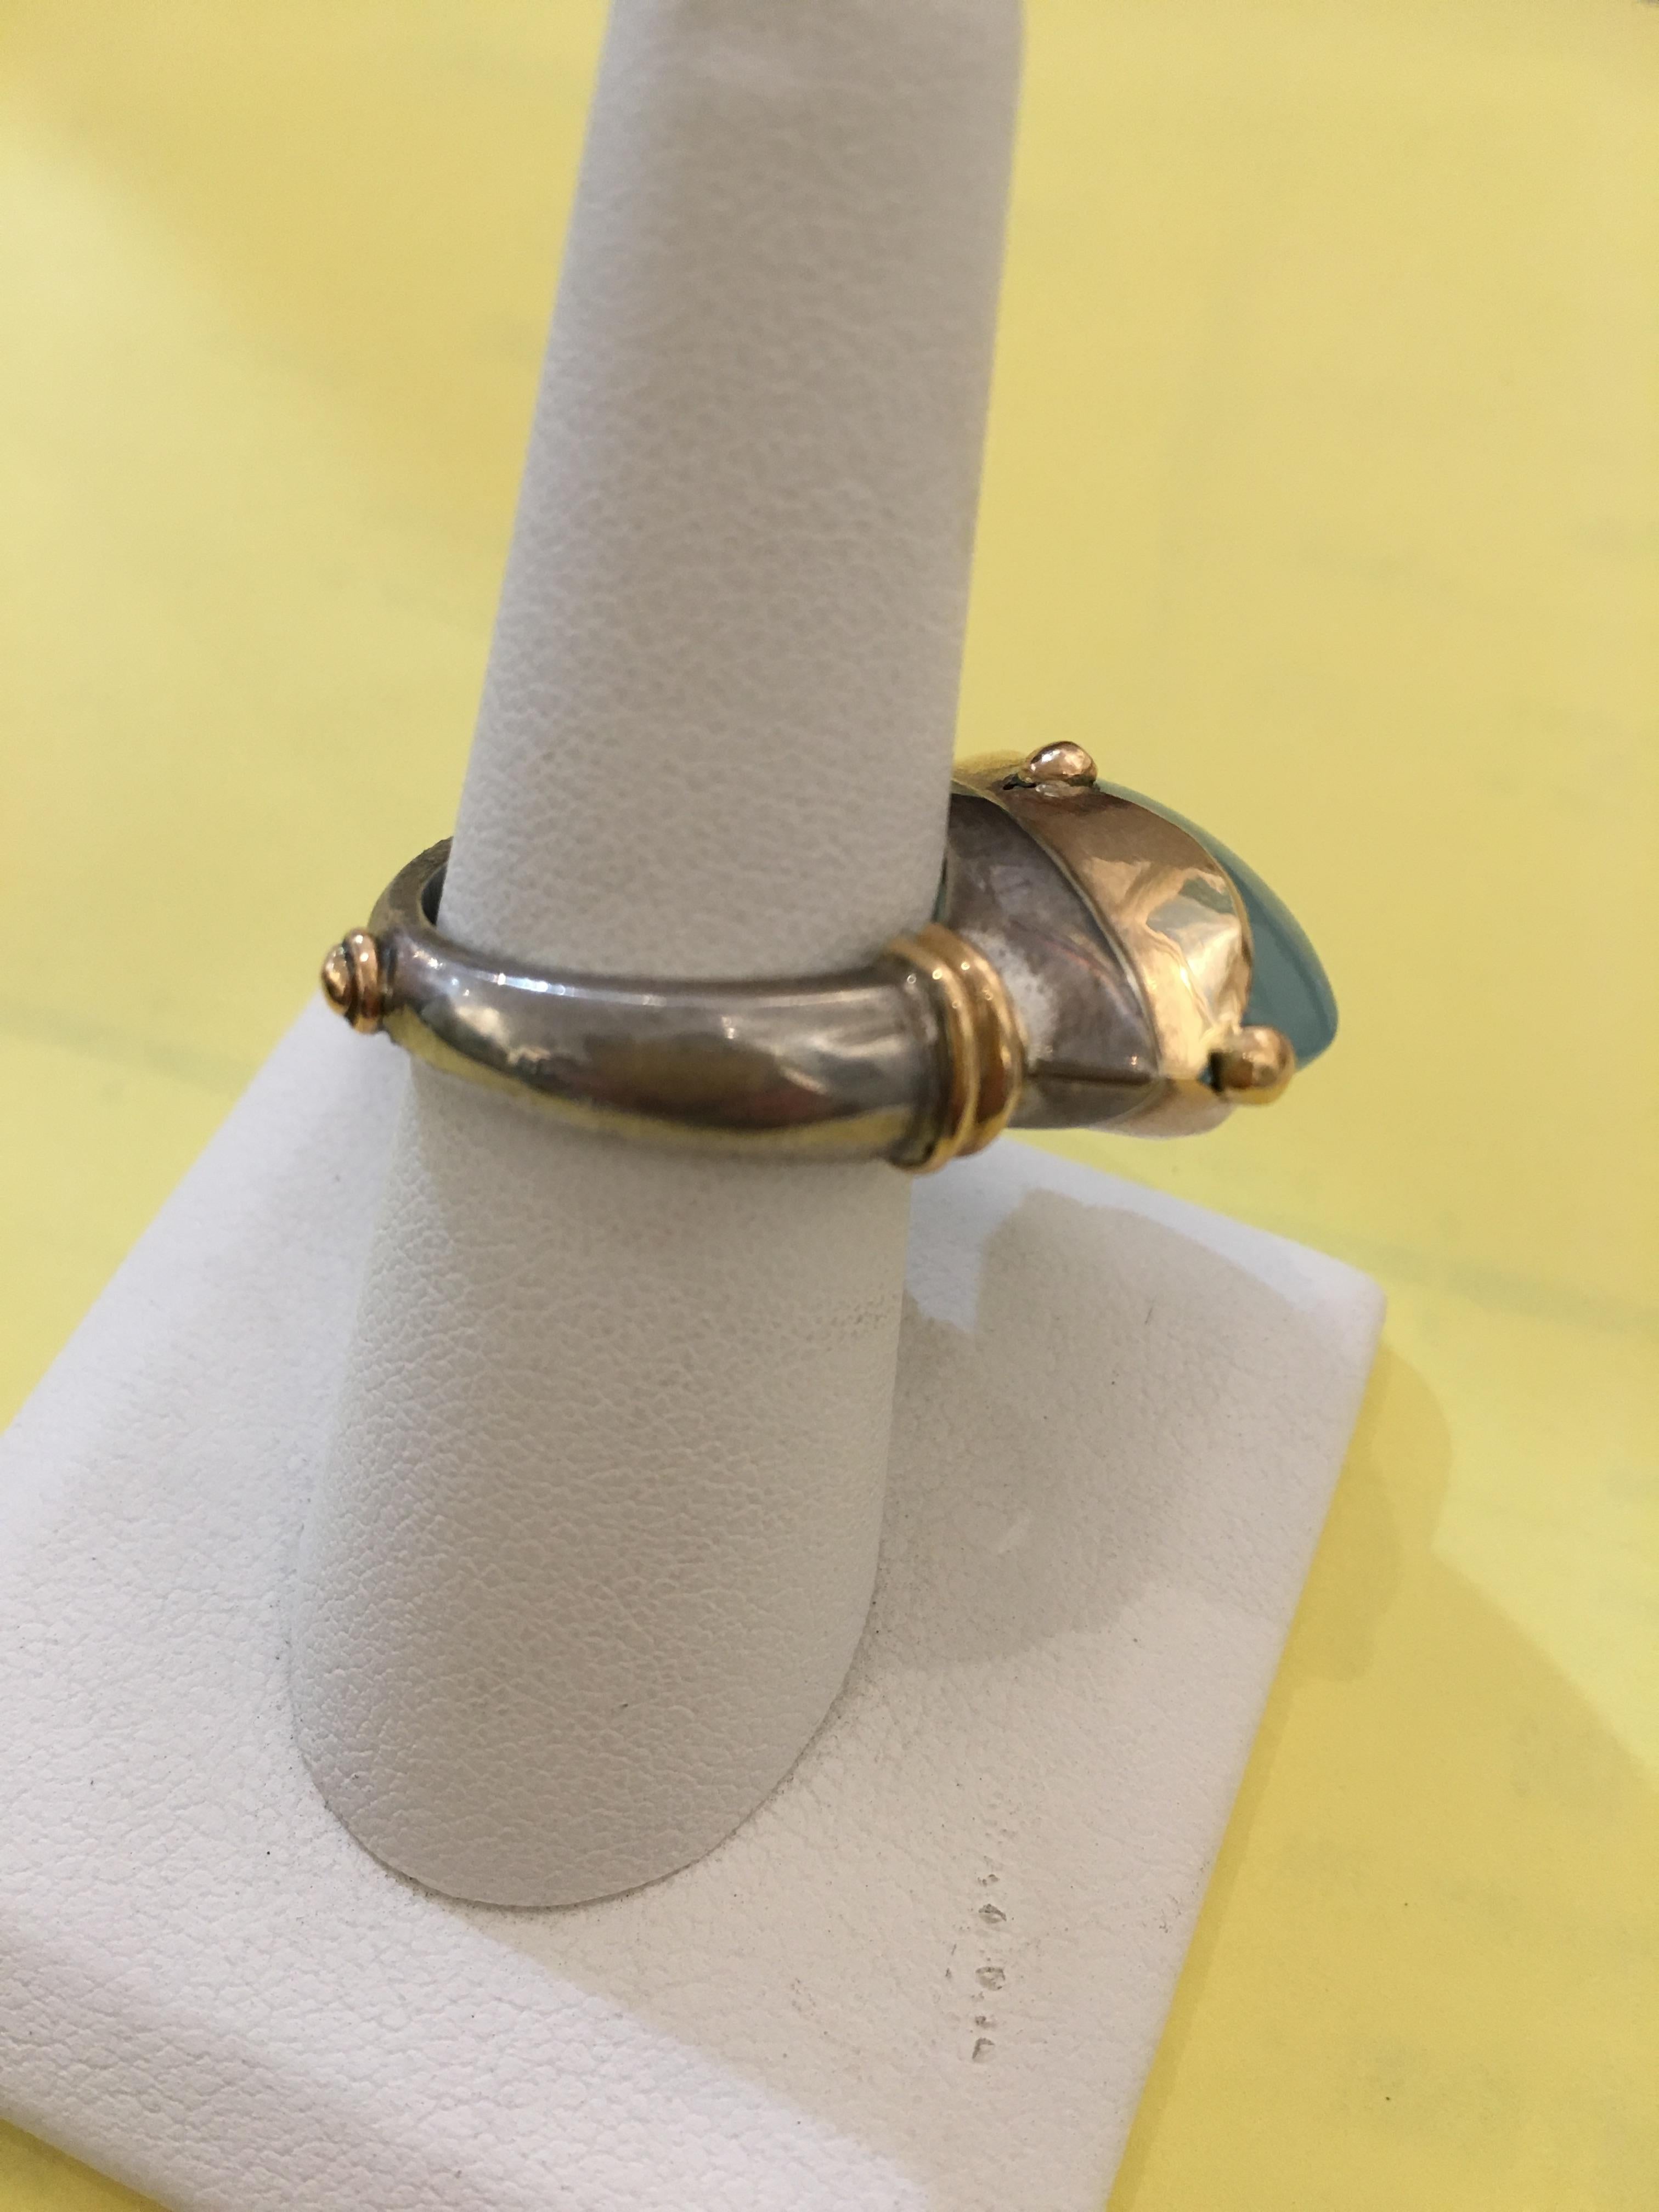 Cabochon Calcedony Cocktail Ring in 18 Karat Gold In Excellent Condition For Sale In Nantucket, MA